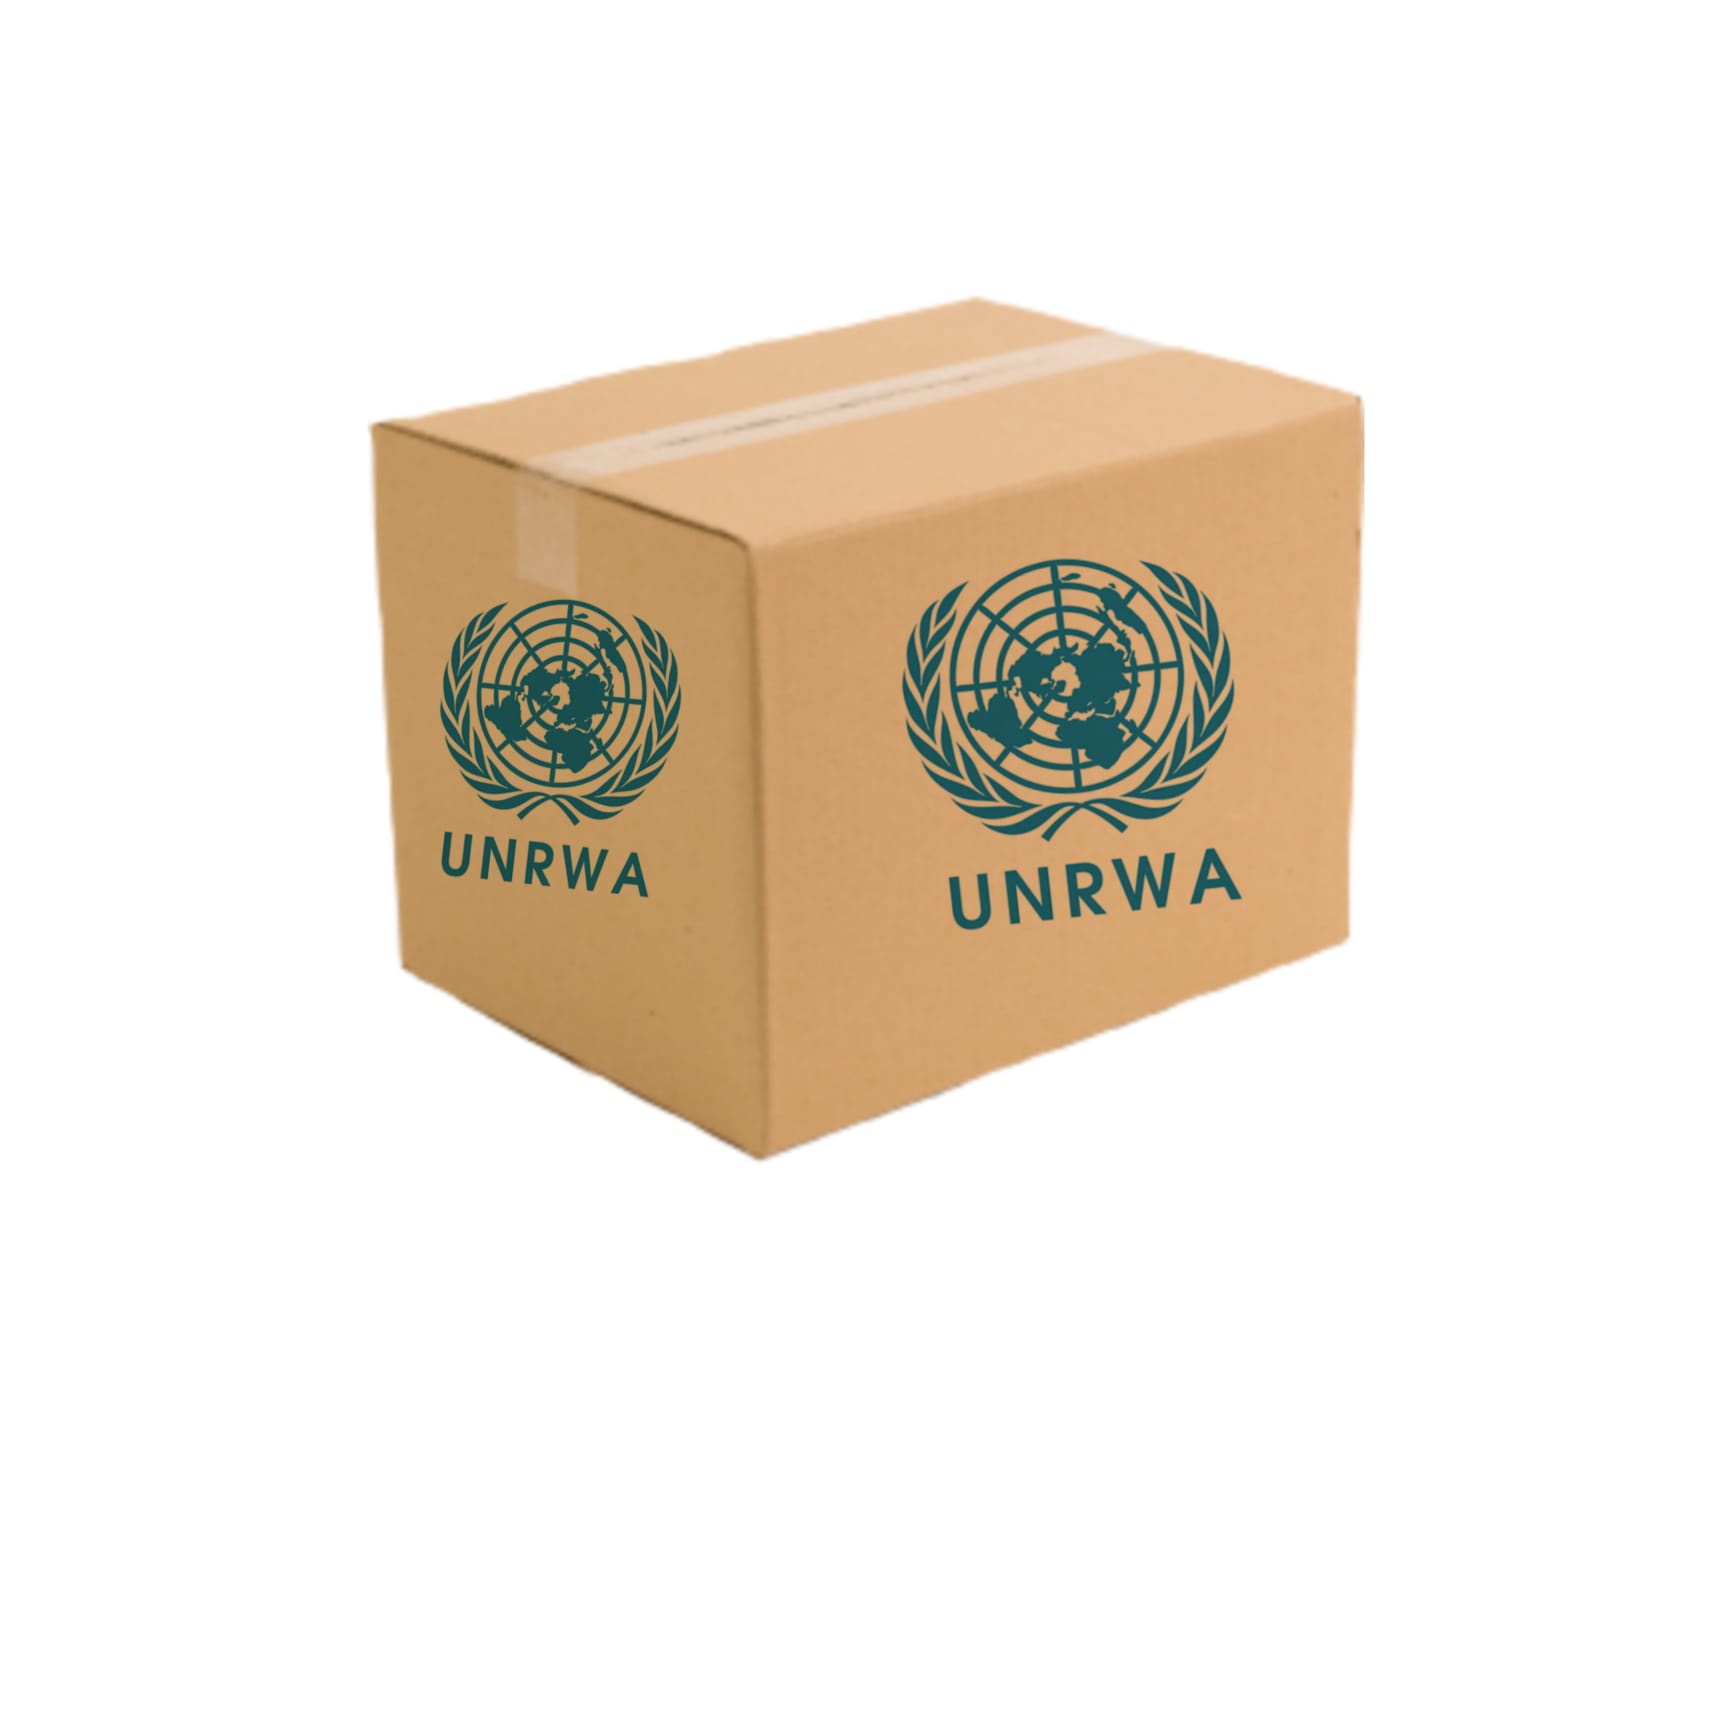 UNRWA to Deliver Food Aid to Palestinian Refugees in War-Torn Syria